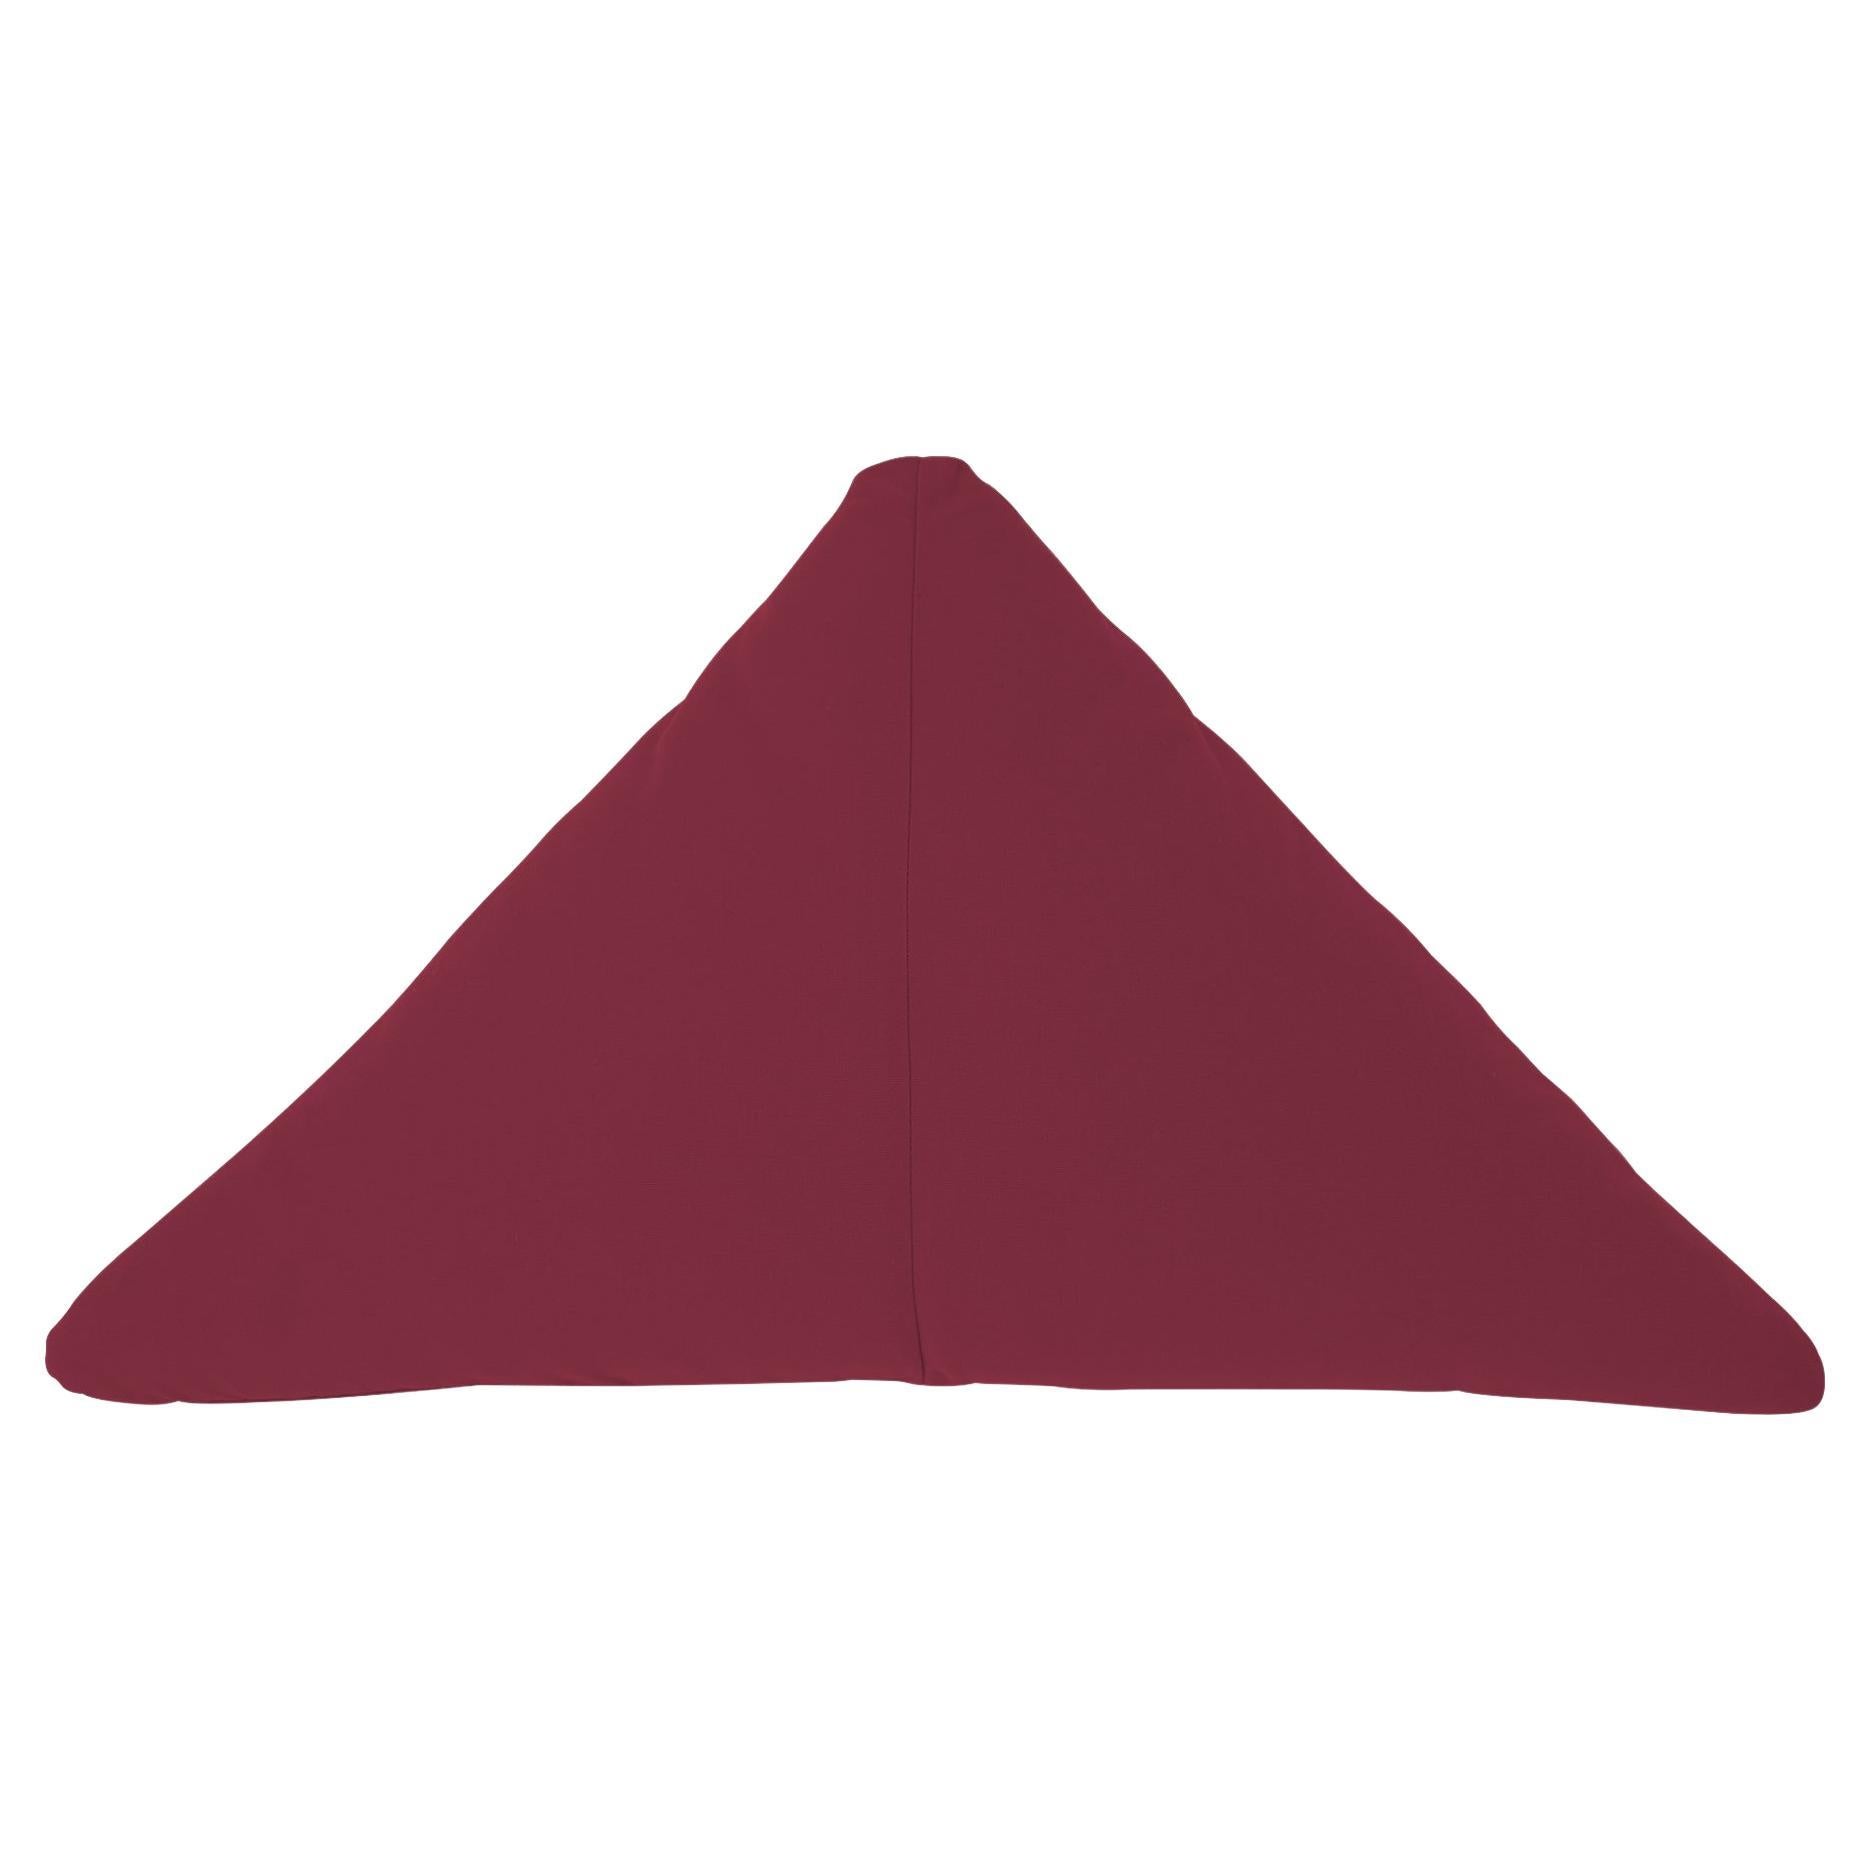 Contemporary Bend Goods - Triangle Throw Pillow in Melon Sunbrella For Sale